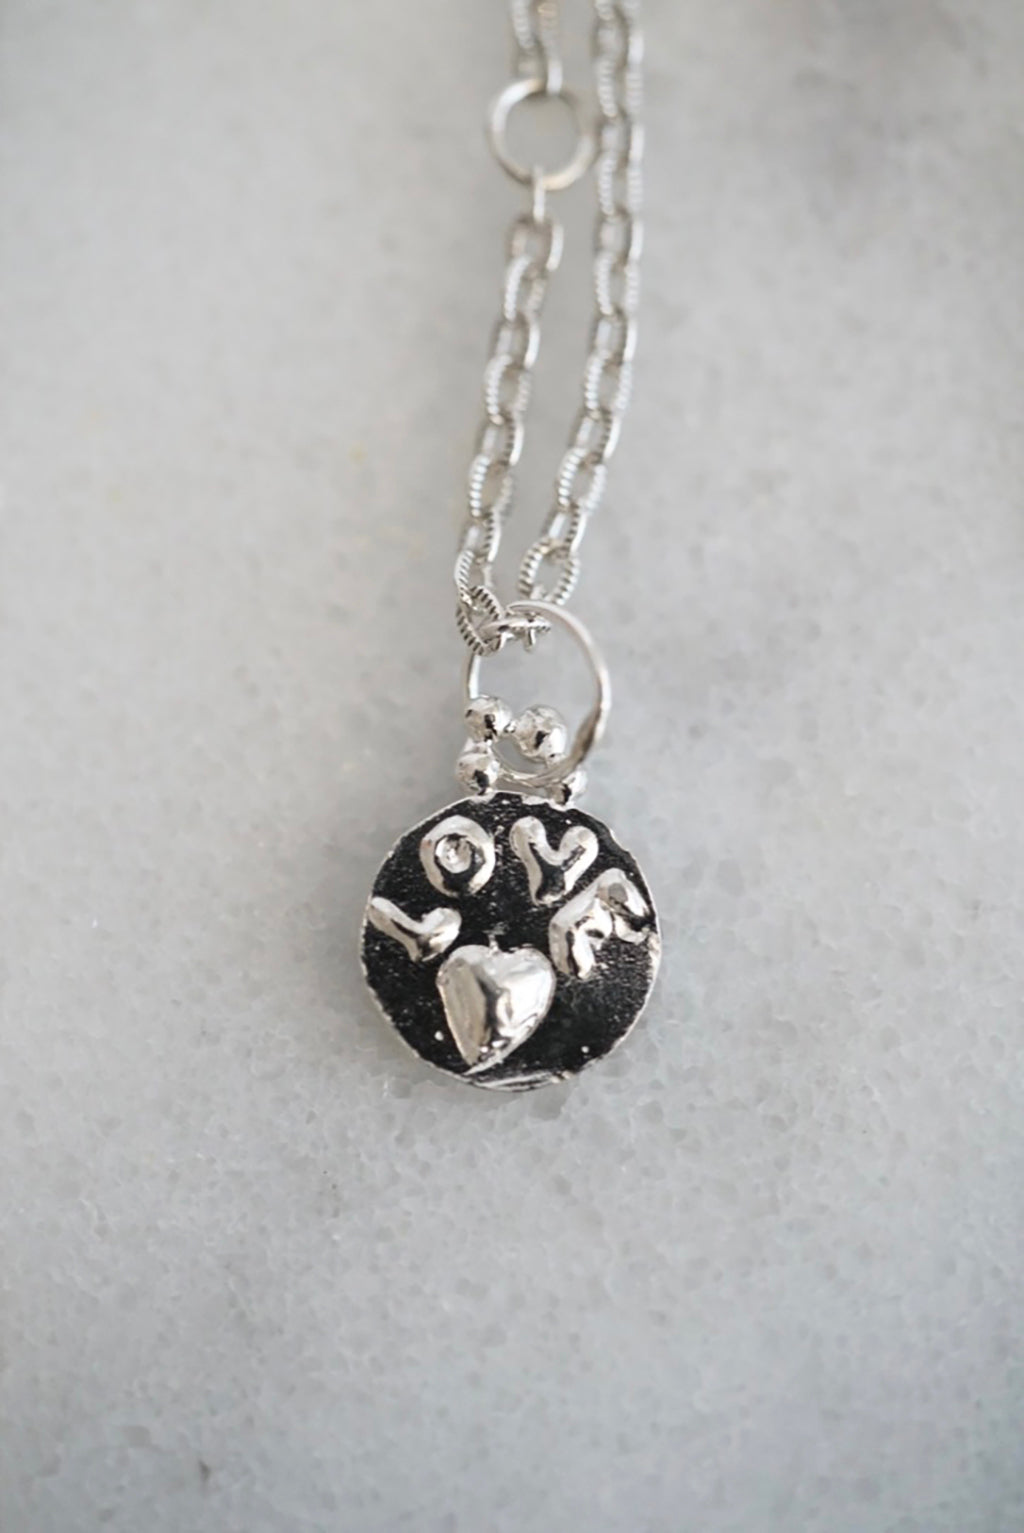 Love medallion necklace in silver